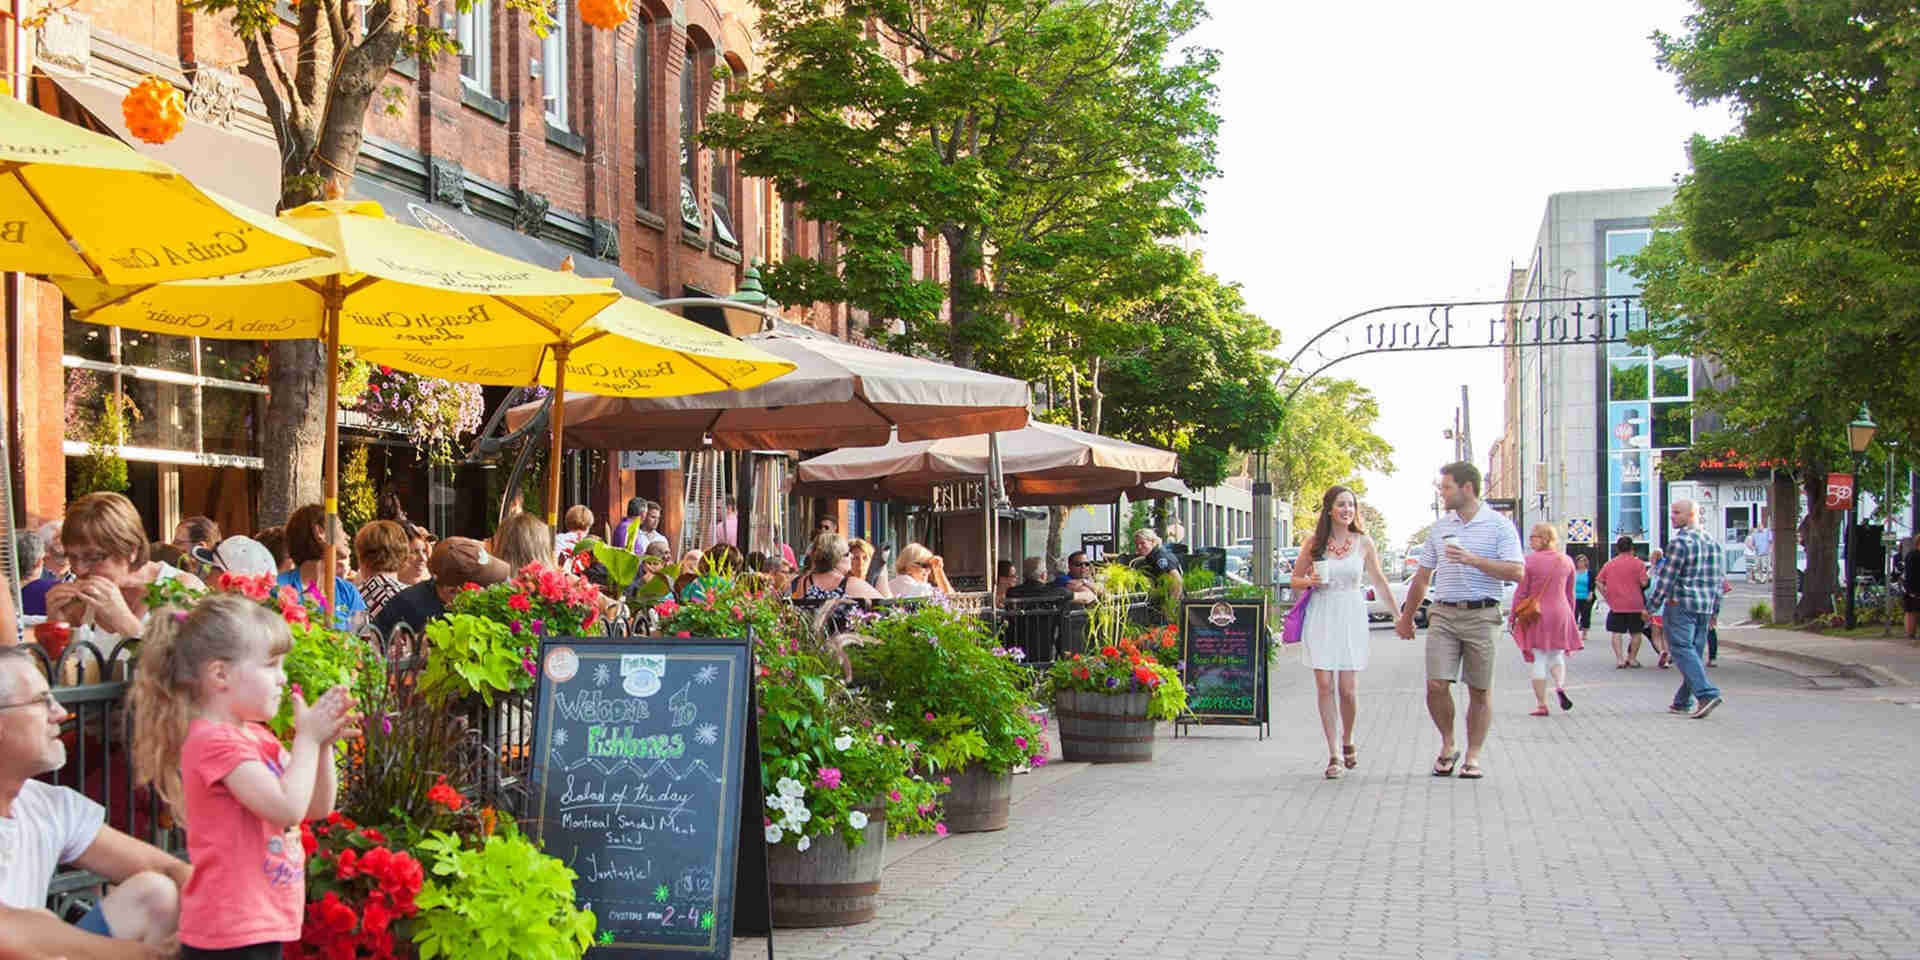 19 Exciting Reasons Why More People Are Calling Charlottetown Home - Charolettown-blog-19-reasons-hero